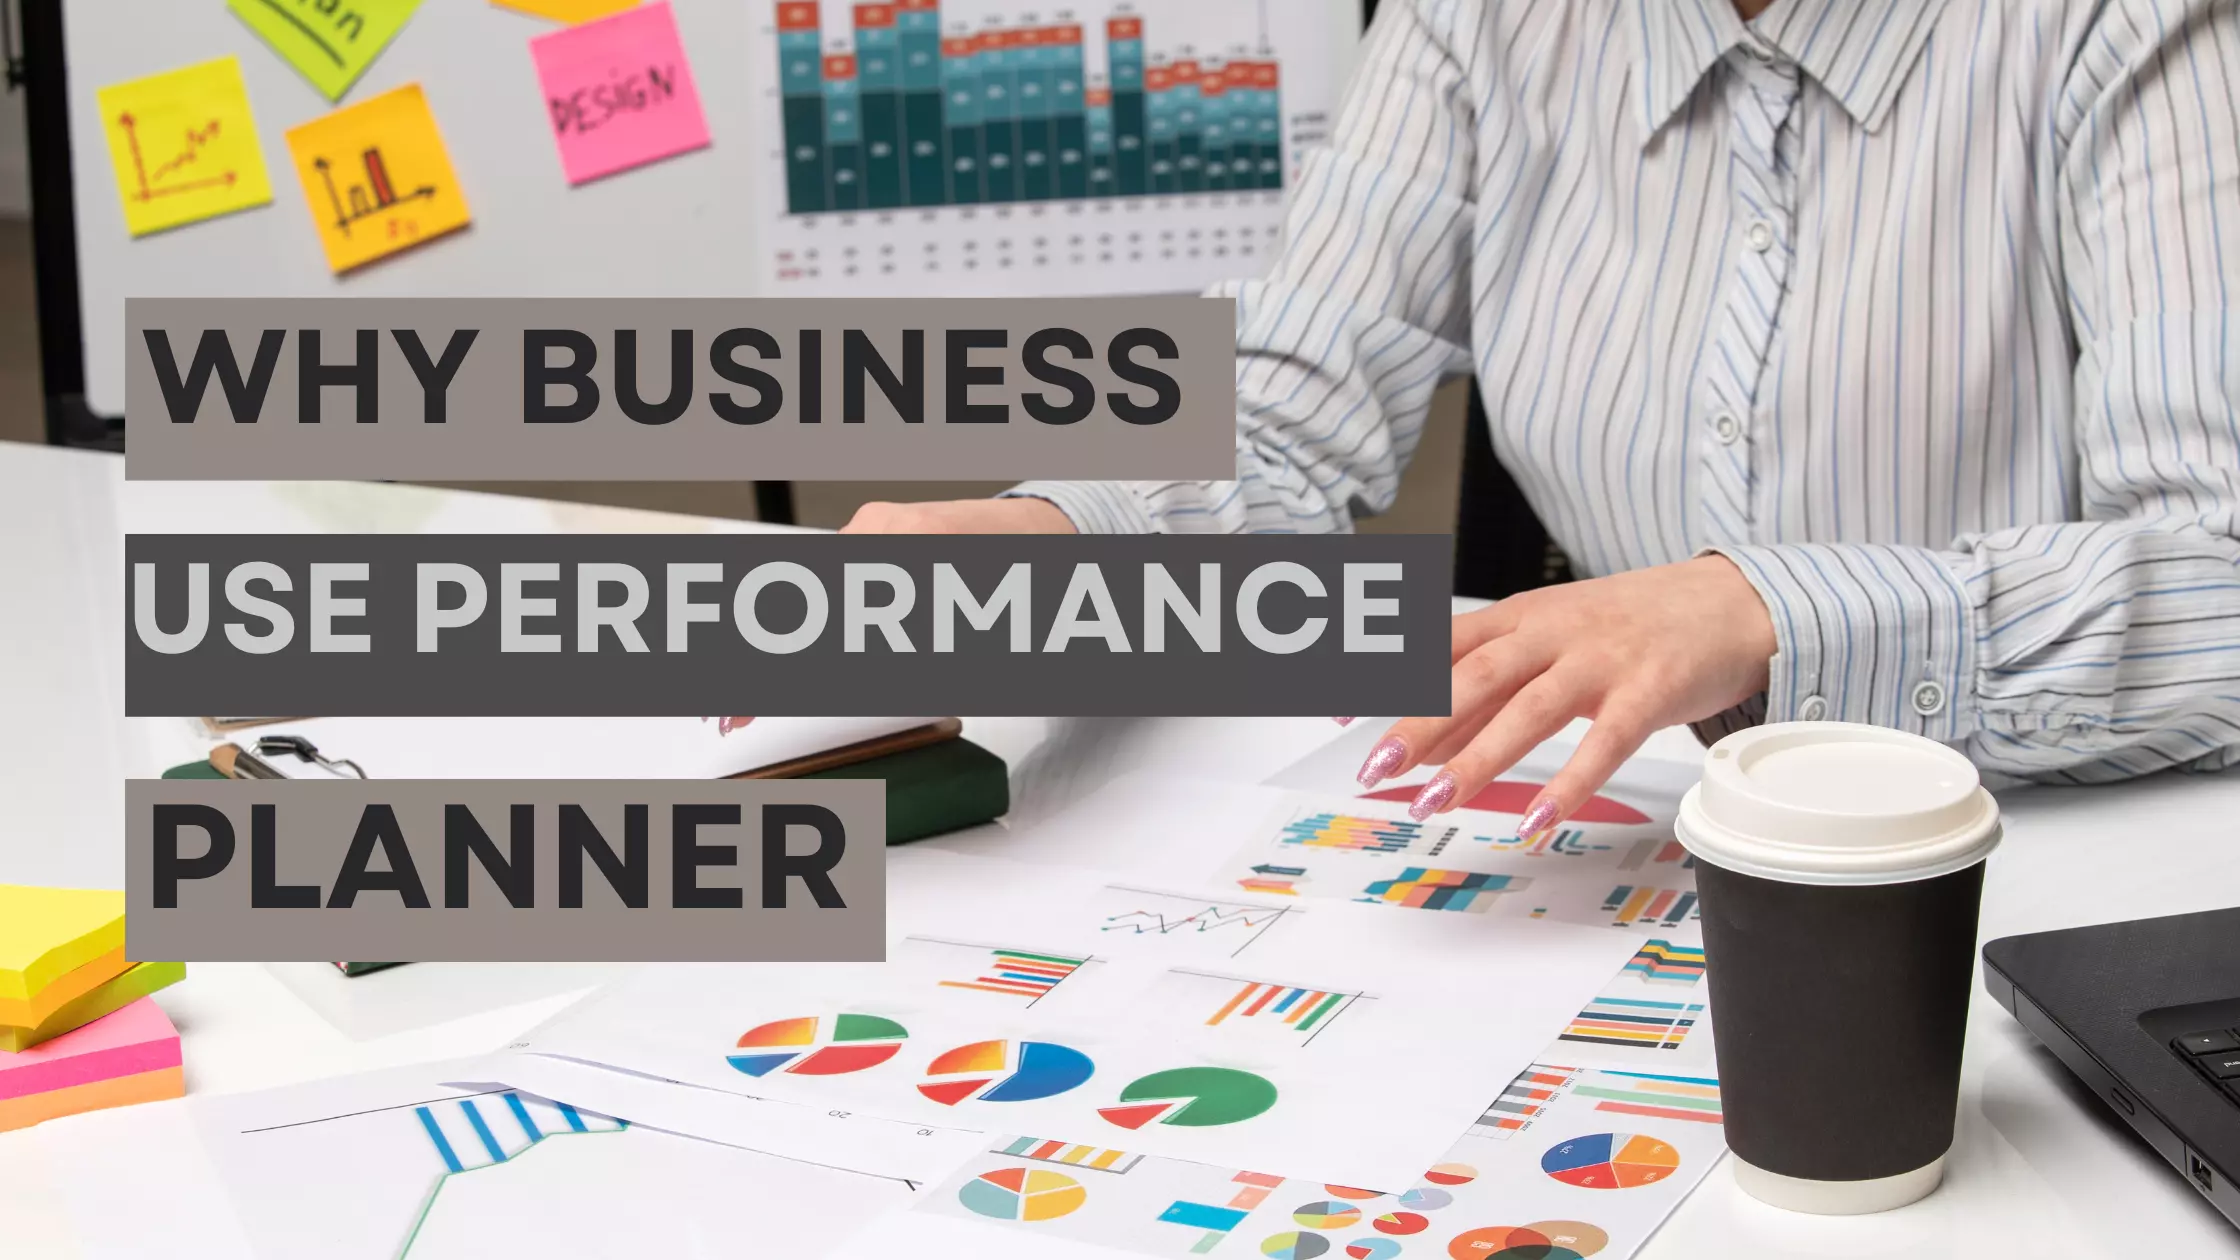 Why Should Your Business Use Performance Planner?